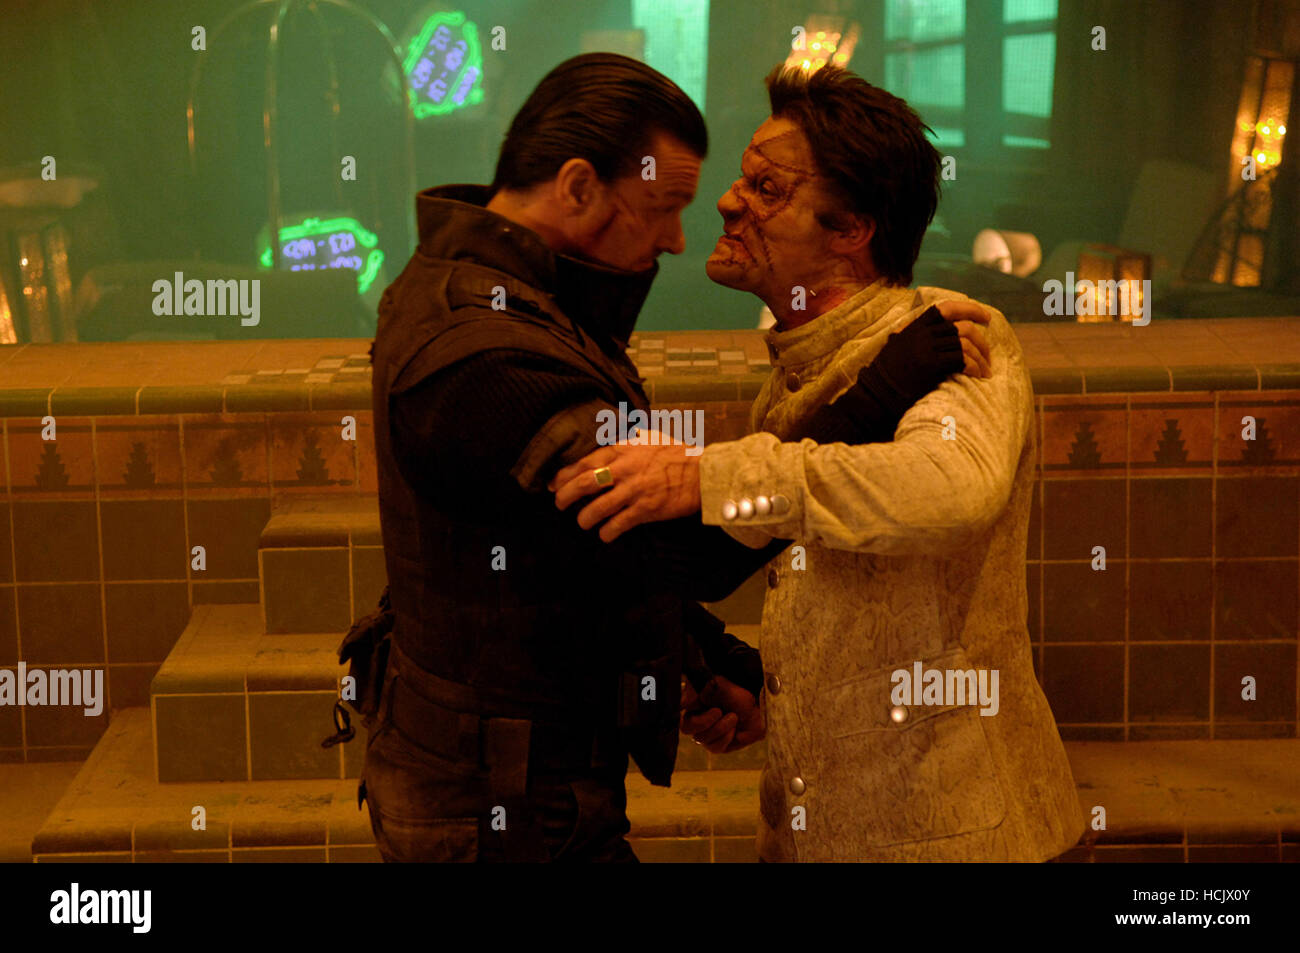 PUNISHER: WAR ZONE, from left: Ray Stevenson, Dominic West, 2008. ©Lions Gate/Courtesy Everett Collection Stock Photo